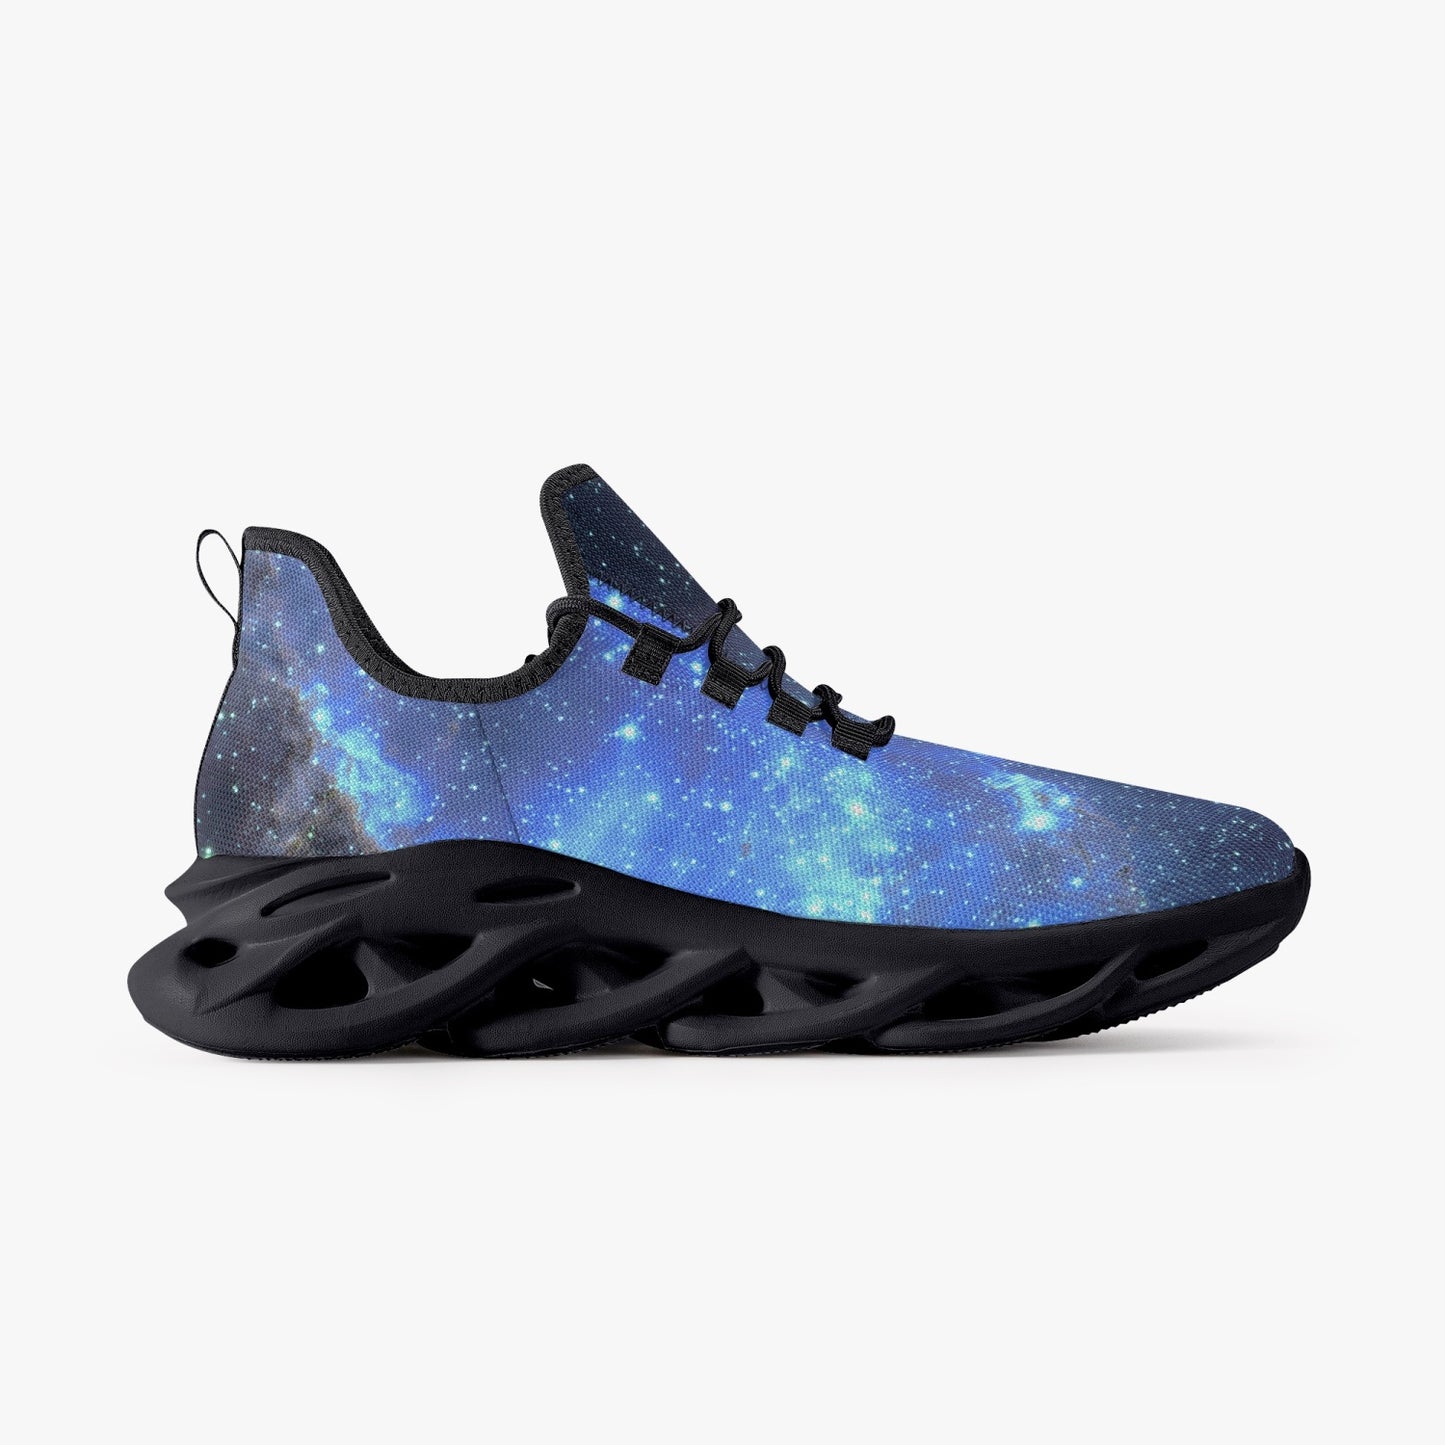 Galaxy Men Sneakers, Space Blue Bouncing Mesh Knit Running Athletic Sport Gym Workout Breathable Lace Up Fitness Shoes Trainers Starcove Fashion